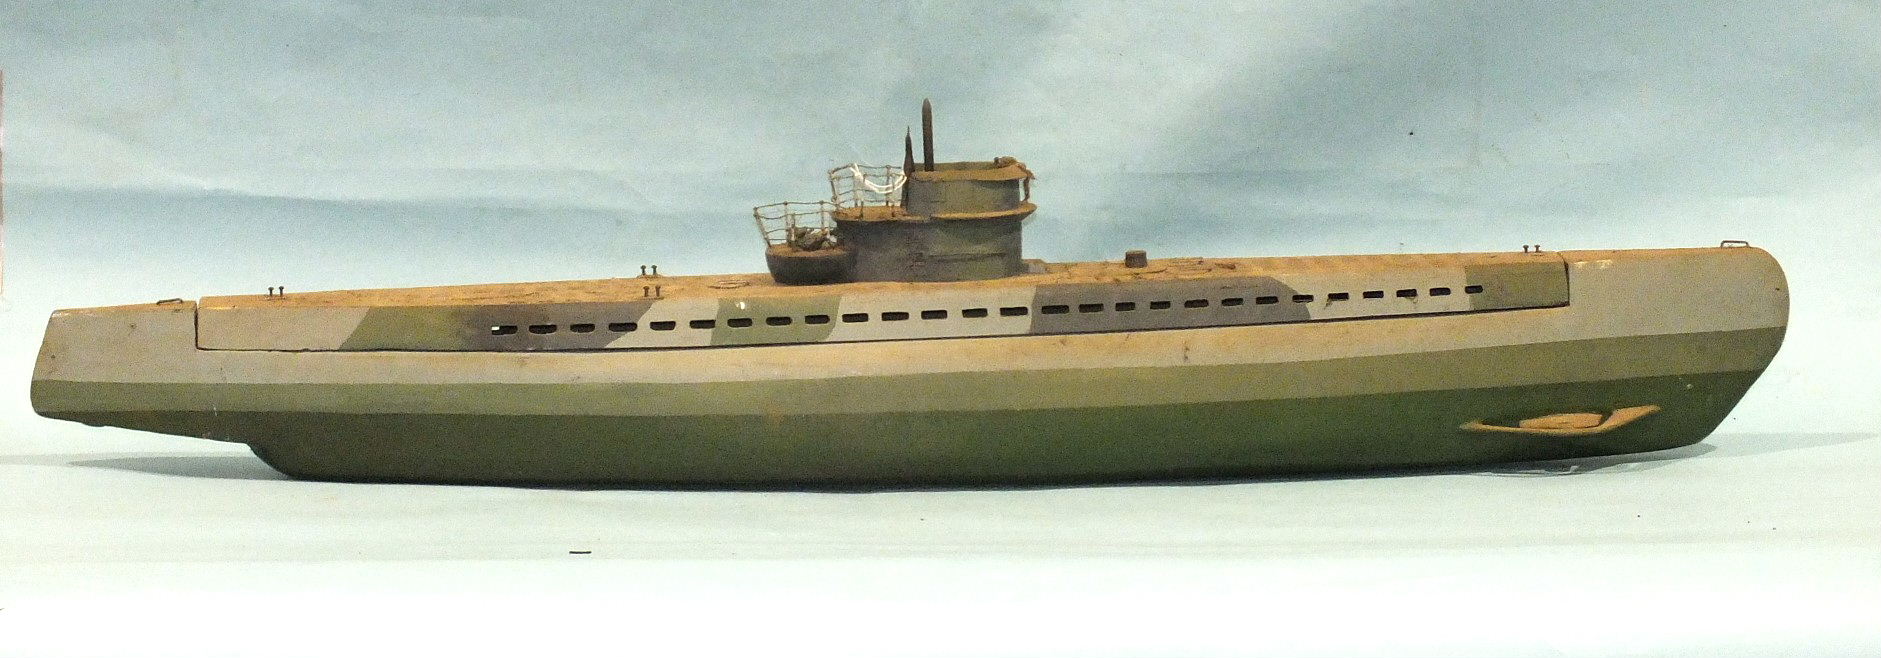 A scratch-built wood model of a submarine, the deck lifts to reveal a motor compartment with drive